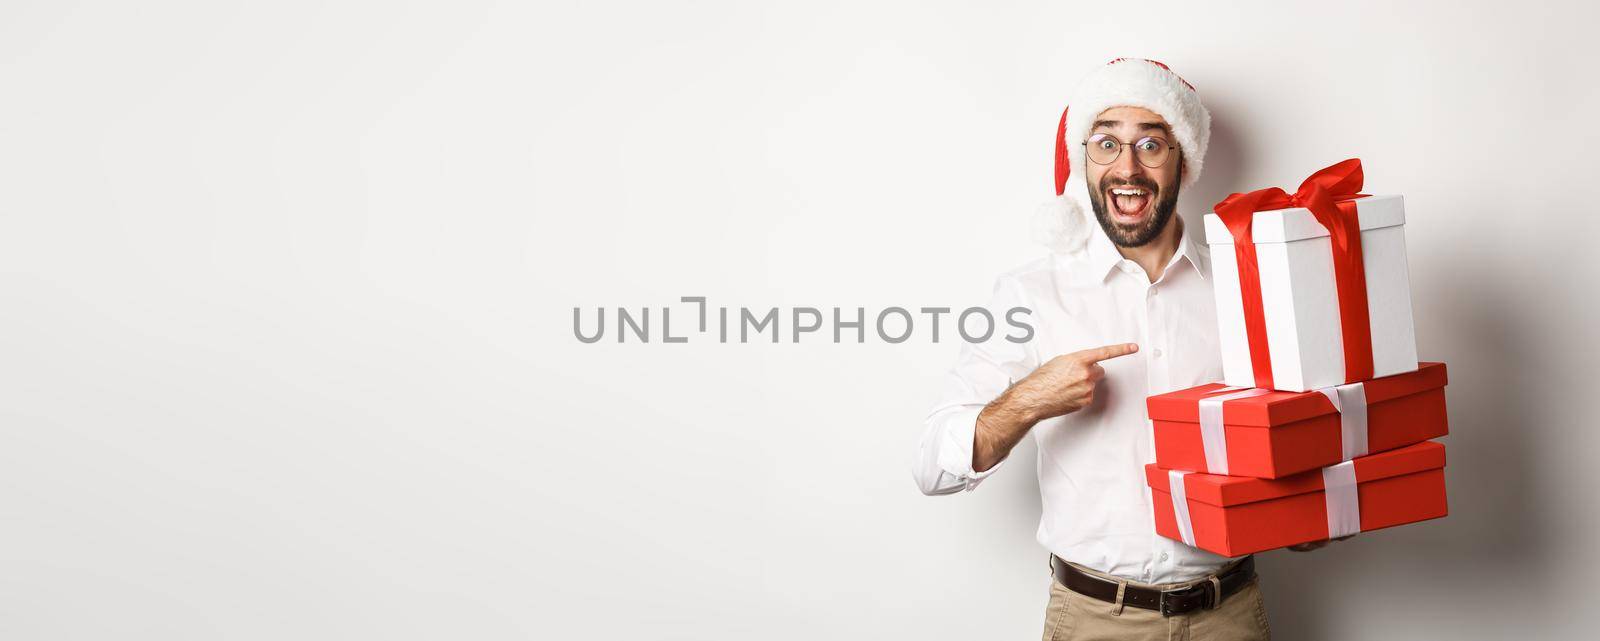 Merry christmas, holidays concept. Surprised man receive xmas gifts, pointing at presents and smiling happy, wearing santa hat, white background.